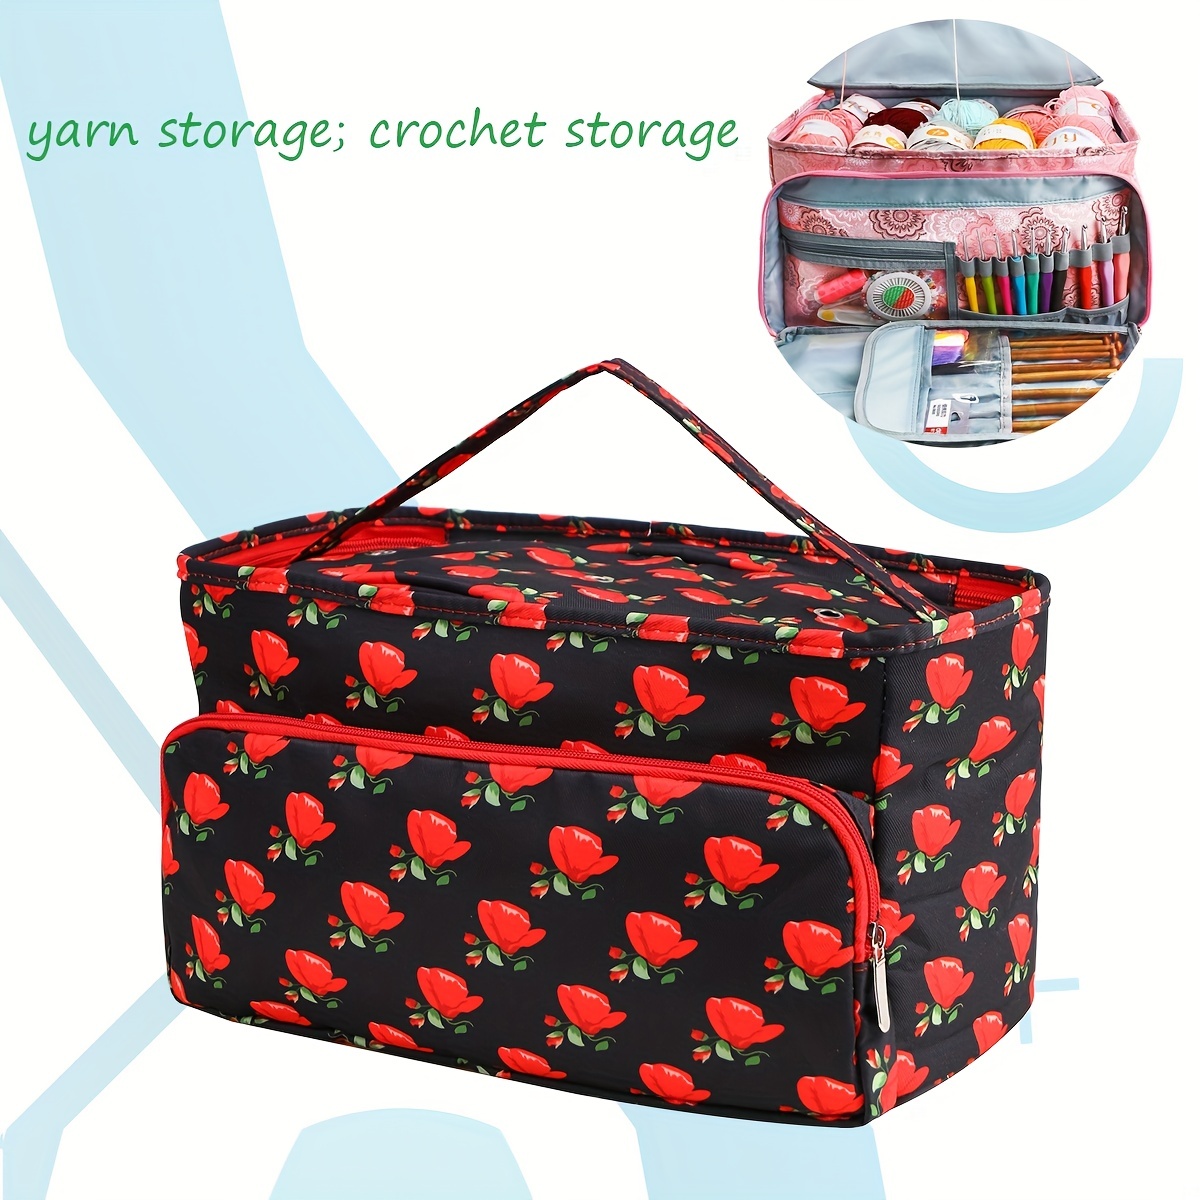  Katech 3 Packs Crochet Bag Organizer-Yarn Storage Bag with  Adjustable Shoulder Strap-Travel Crochet Project Bags and Totes-Yarn  Organizers and Storage-Knitting & Crochet Supplies Christmas Gift : Arts,  Crafts & Sewing